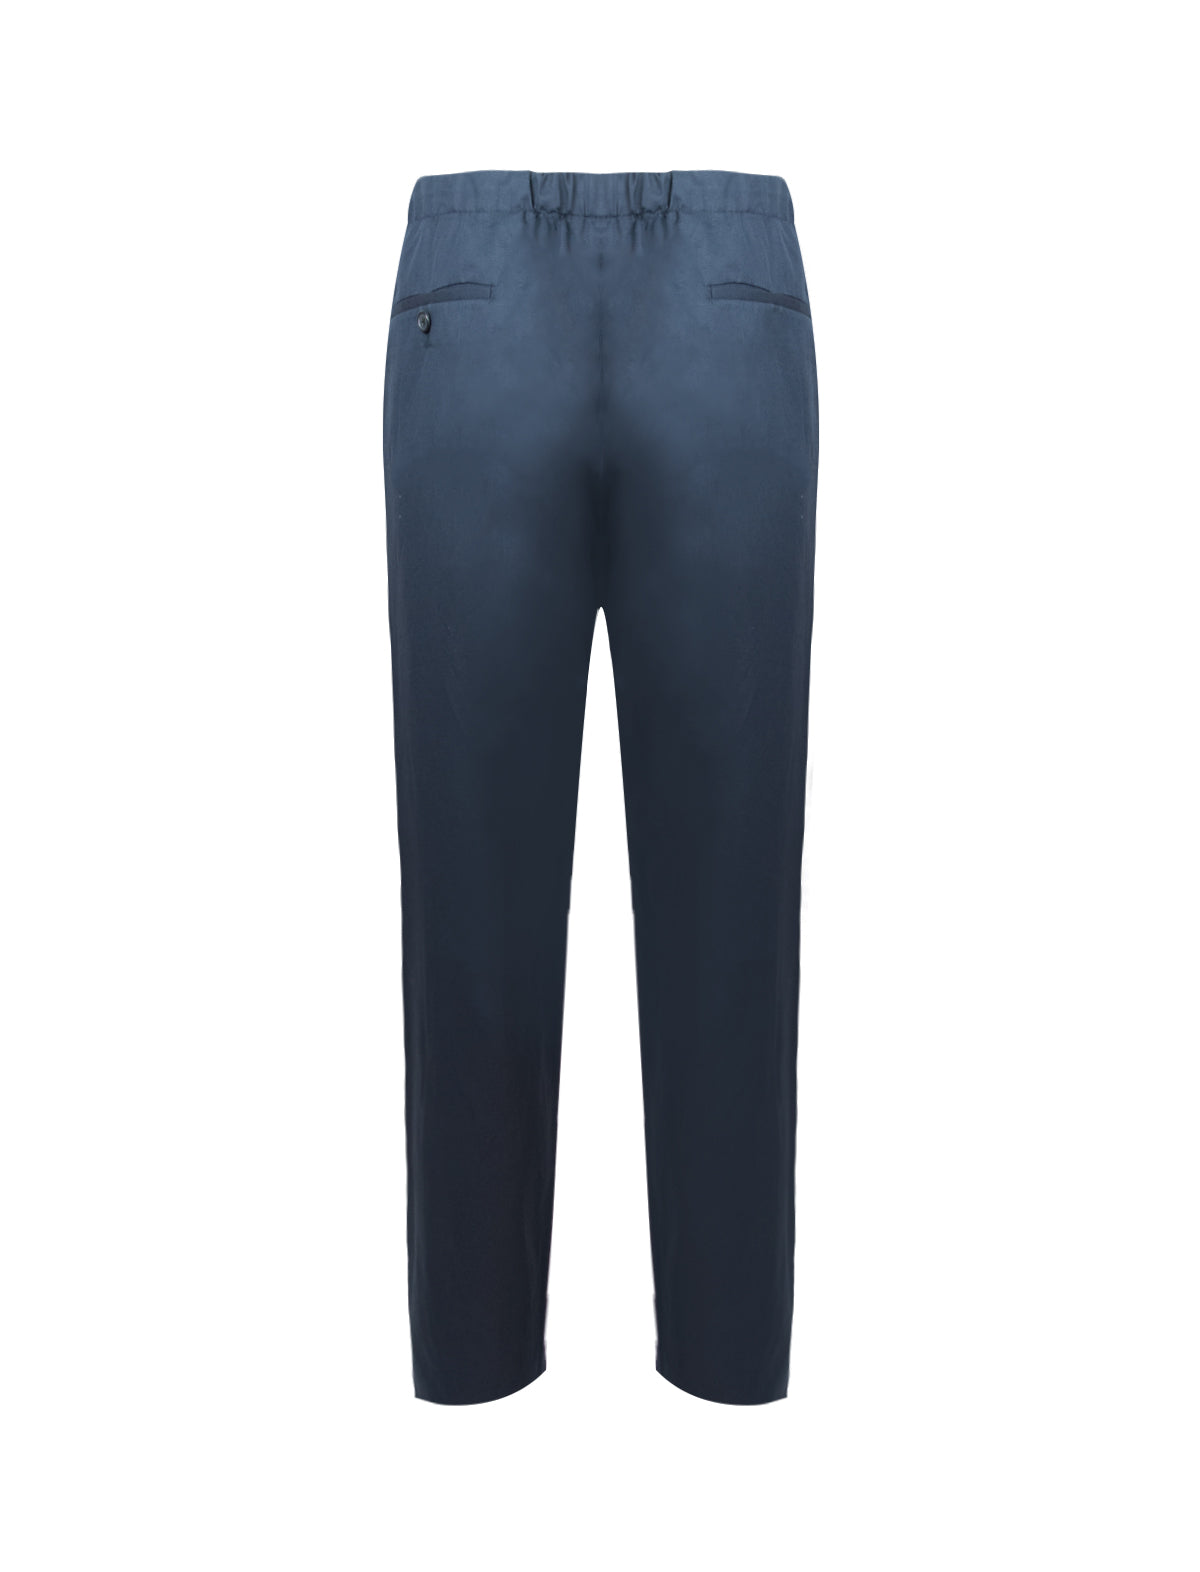 CARUSO Cotton Blend Drawstring Pants in Navy